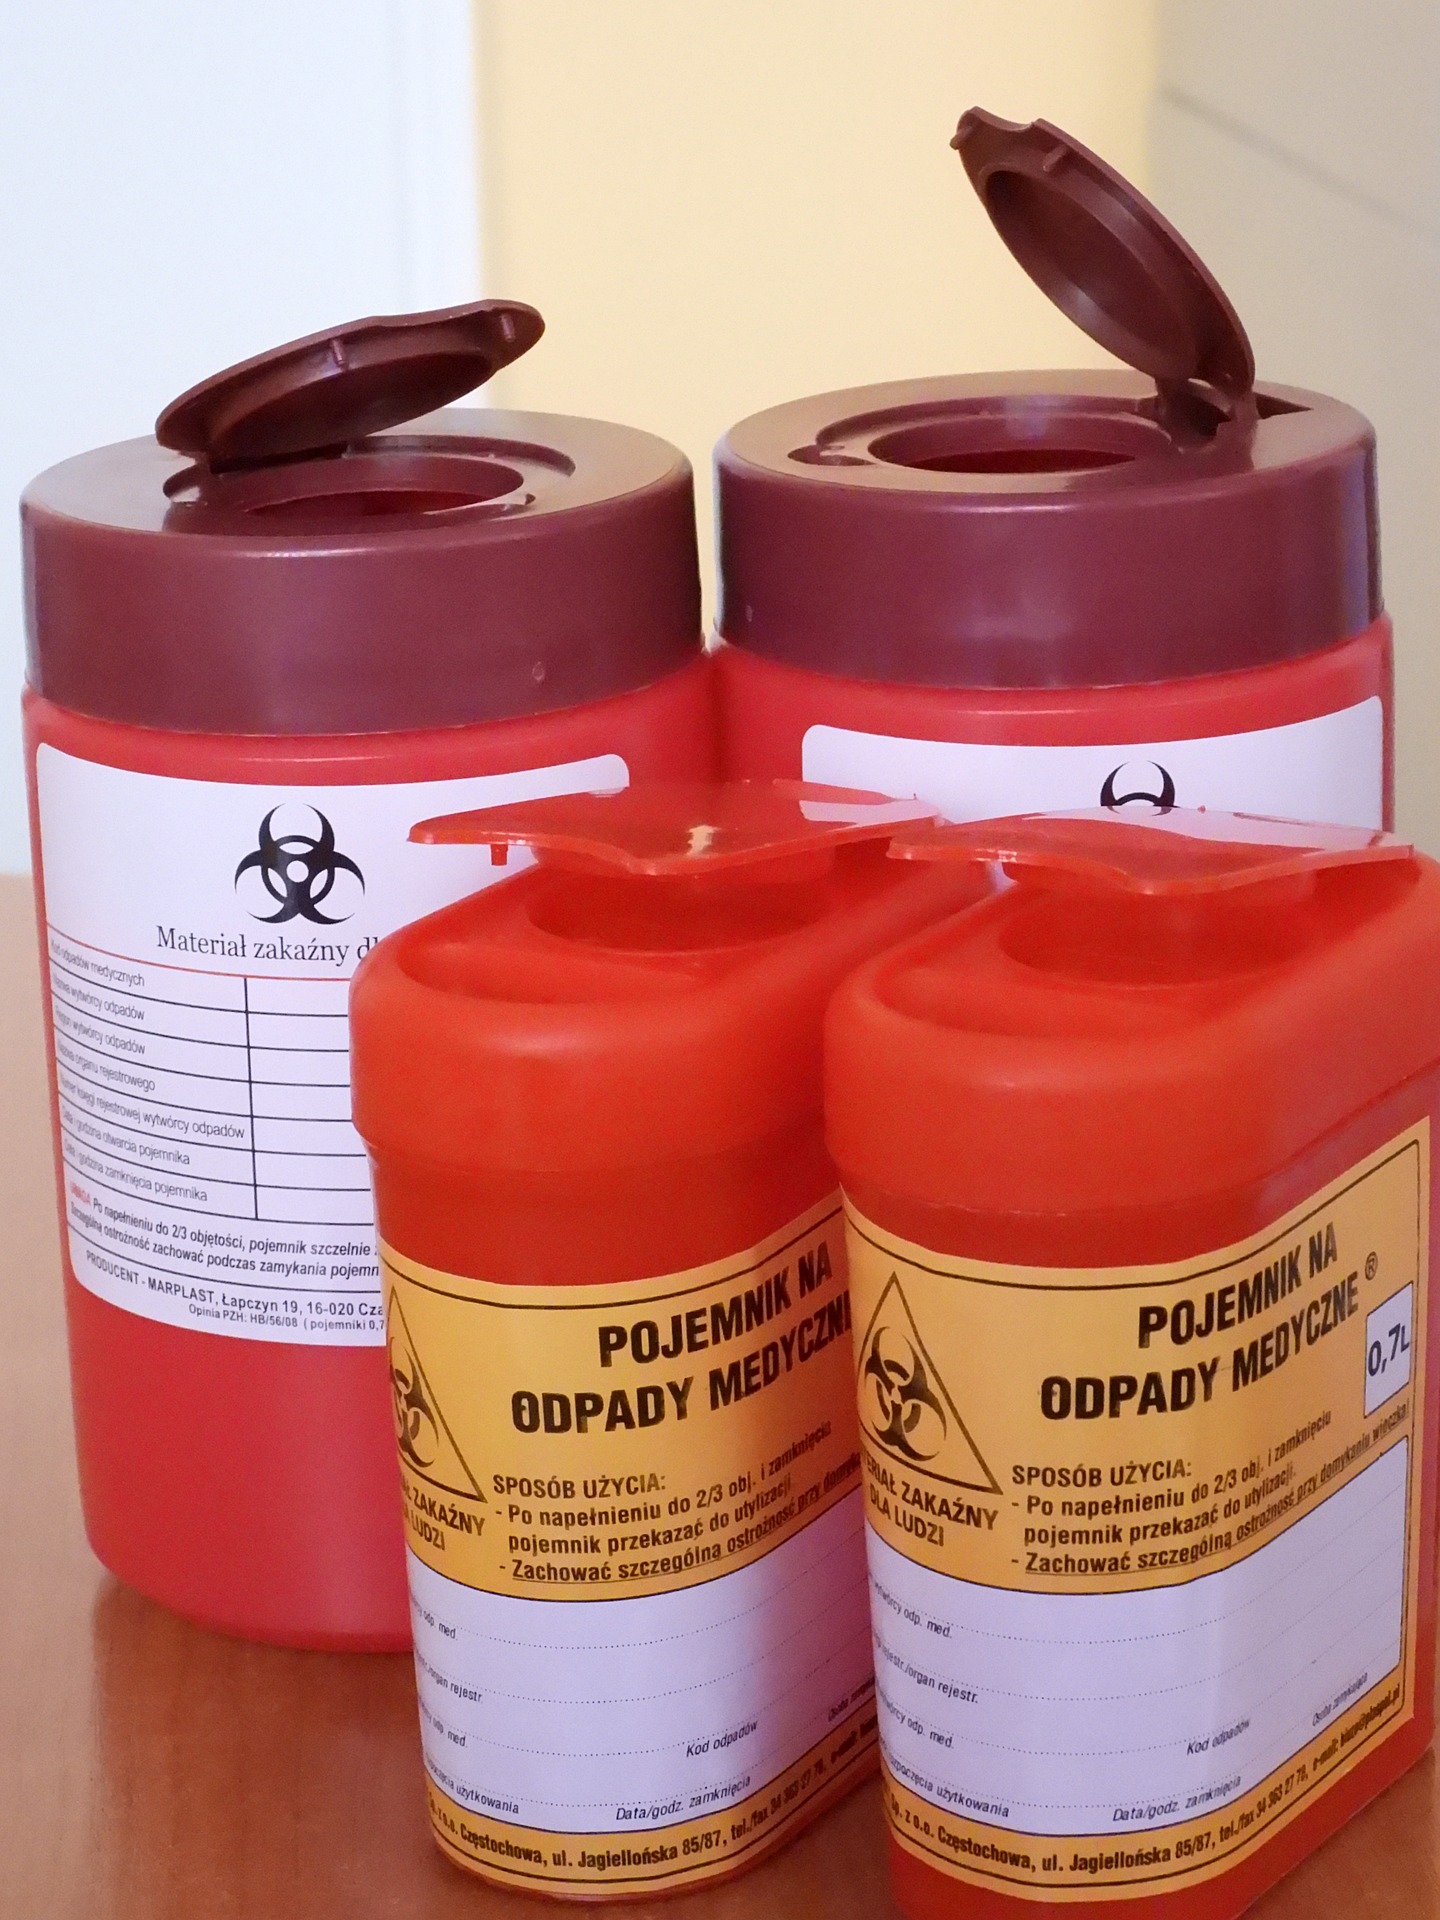 containers-for-medical-waste